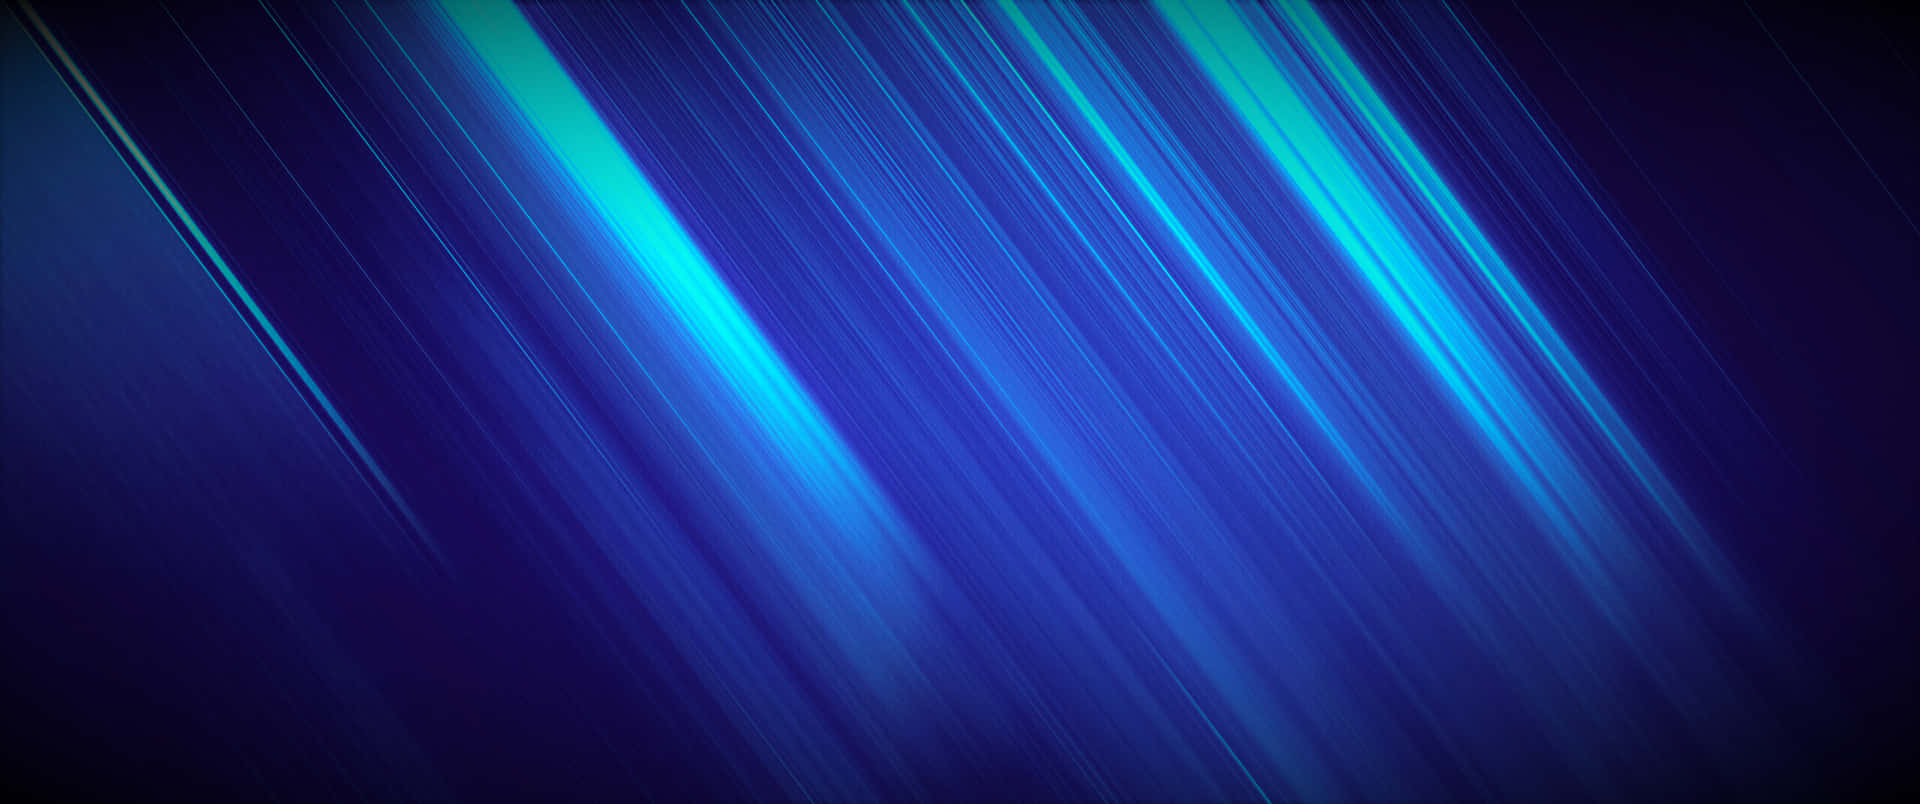 3440x1440 Neon Blue And Green Thin Lines Wallpaper